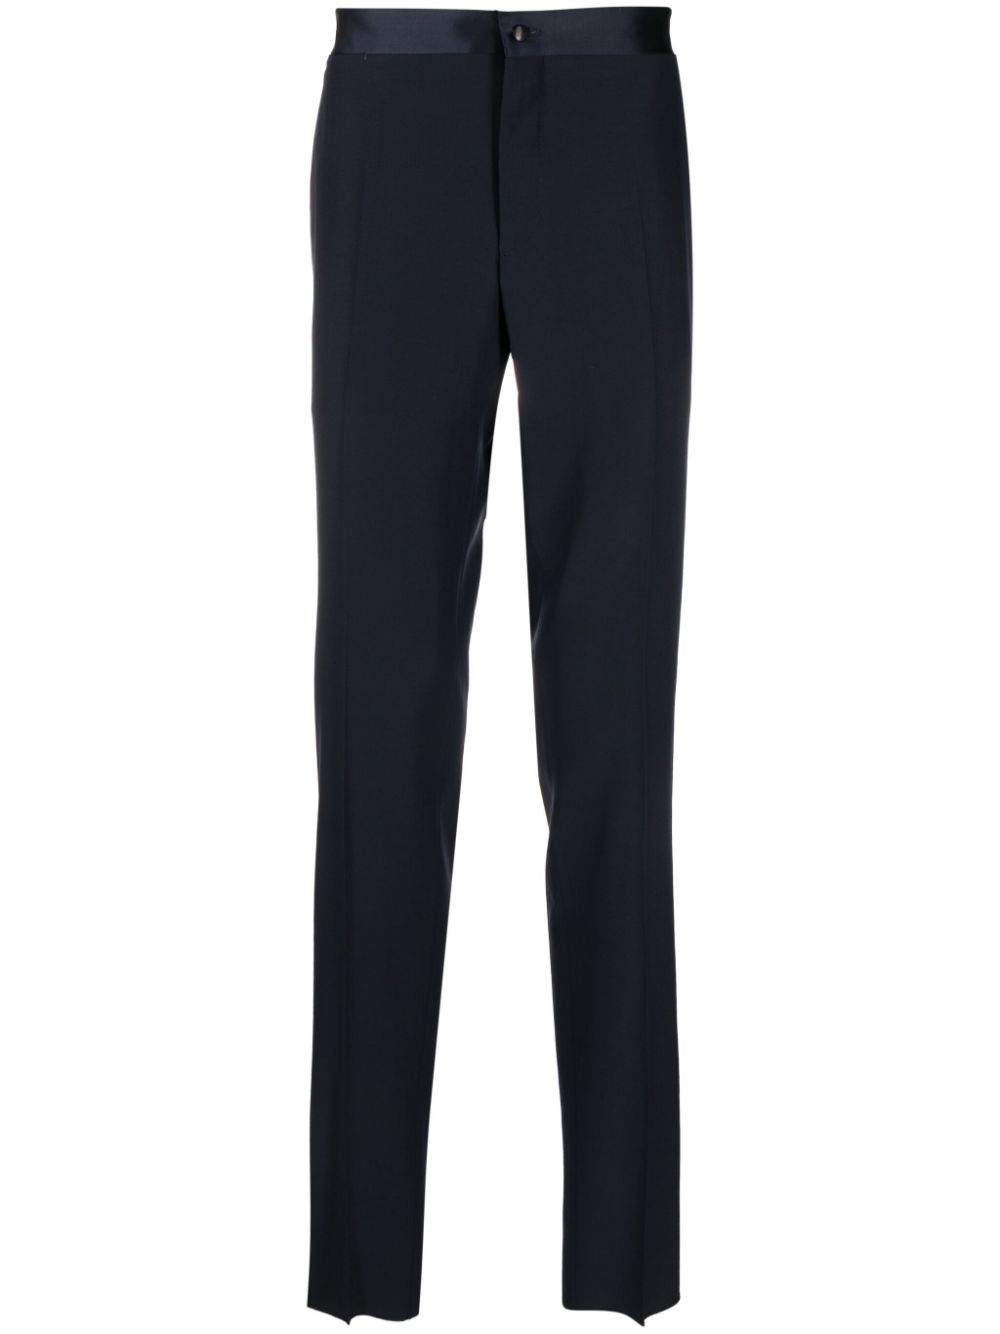 CANALI SIDE-STRIPE TAPERED-LEG TROUSERS